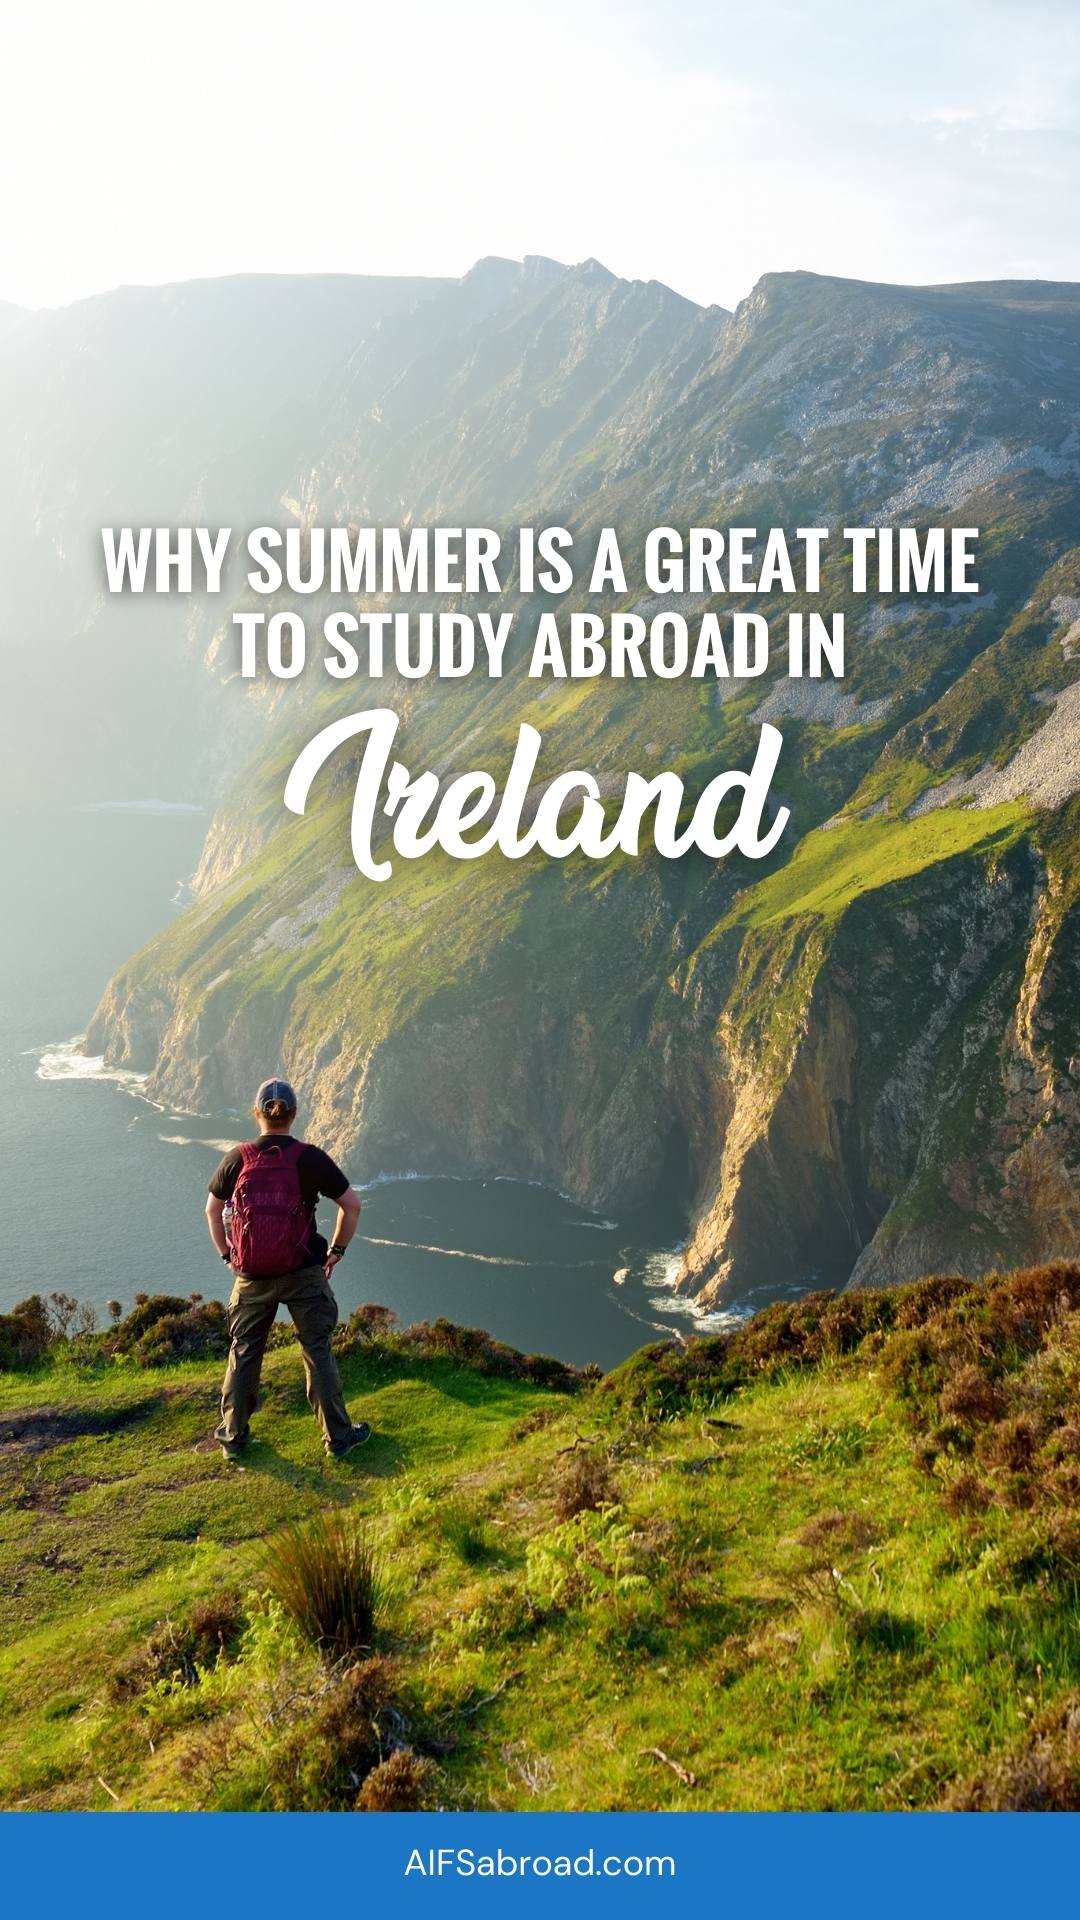 Young man on lush green high sea cliffs with text overlay, "Why summer is a great time to study abroad in Ireland"